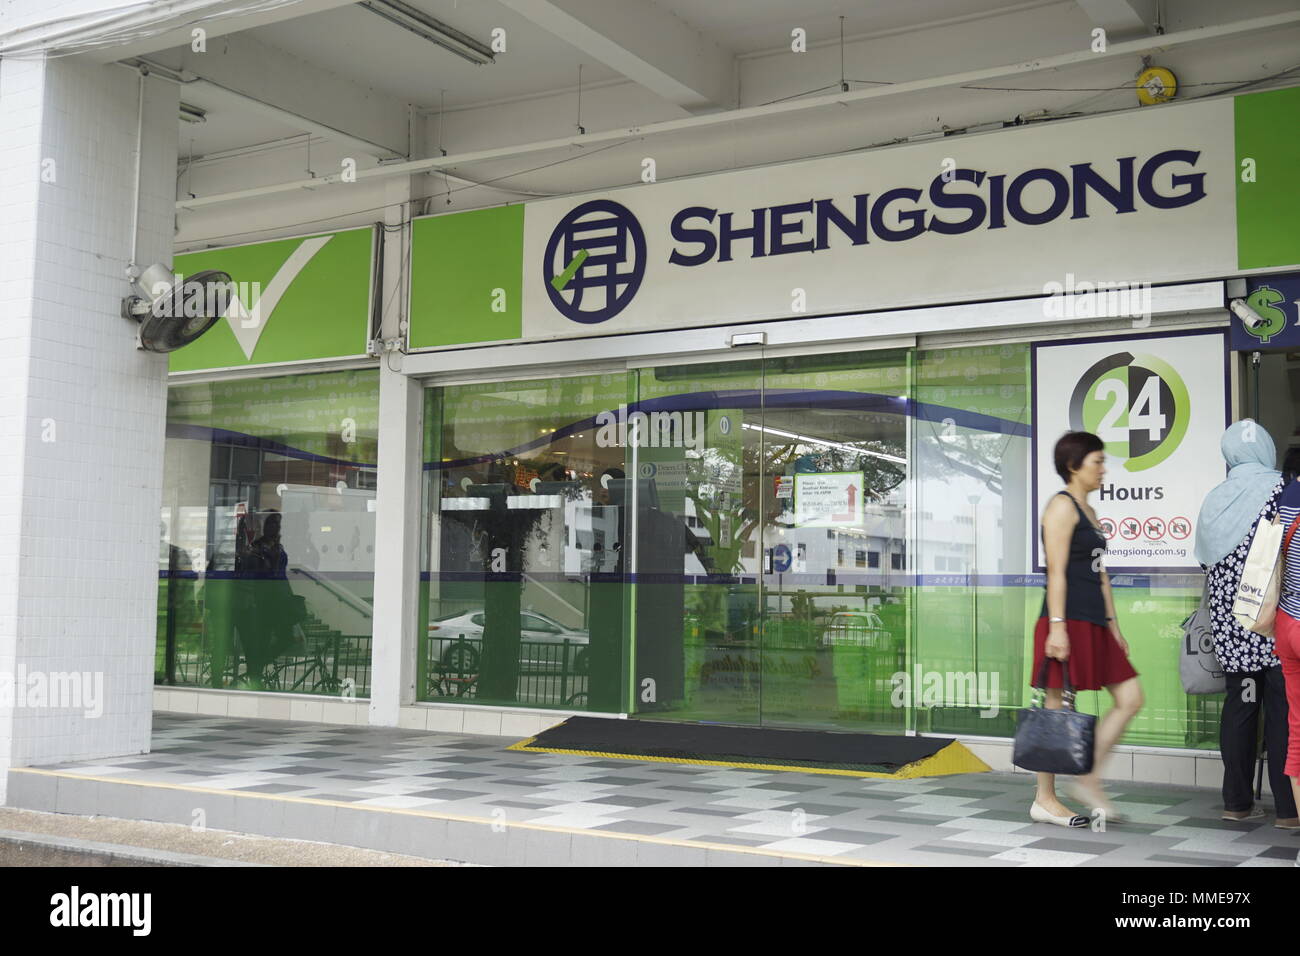 Sheng Siong, a grocery and fresh food supermarket chain in Singapore. Stock Photo